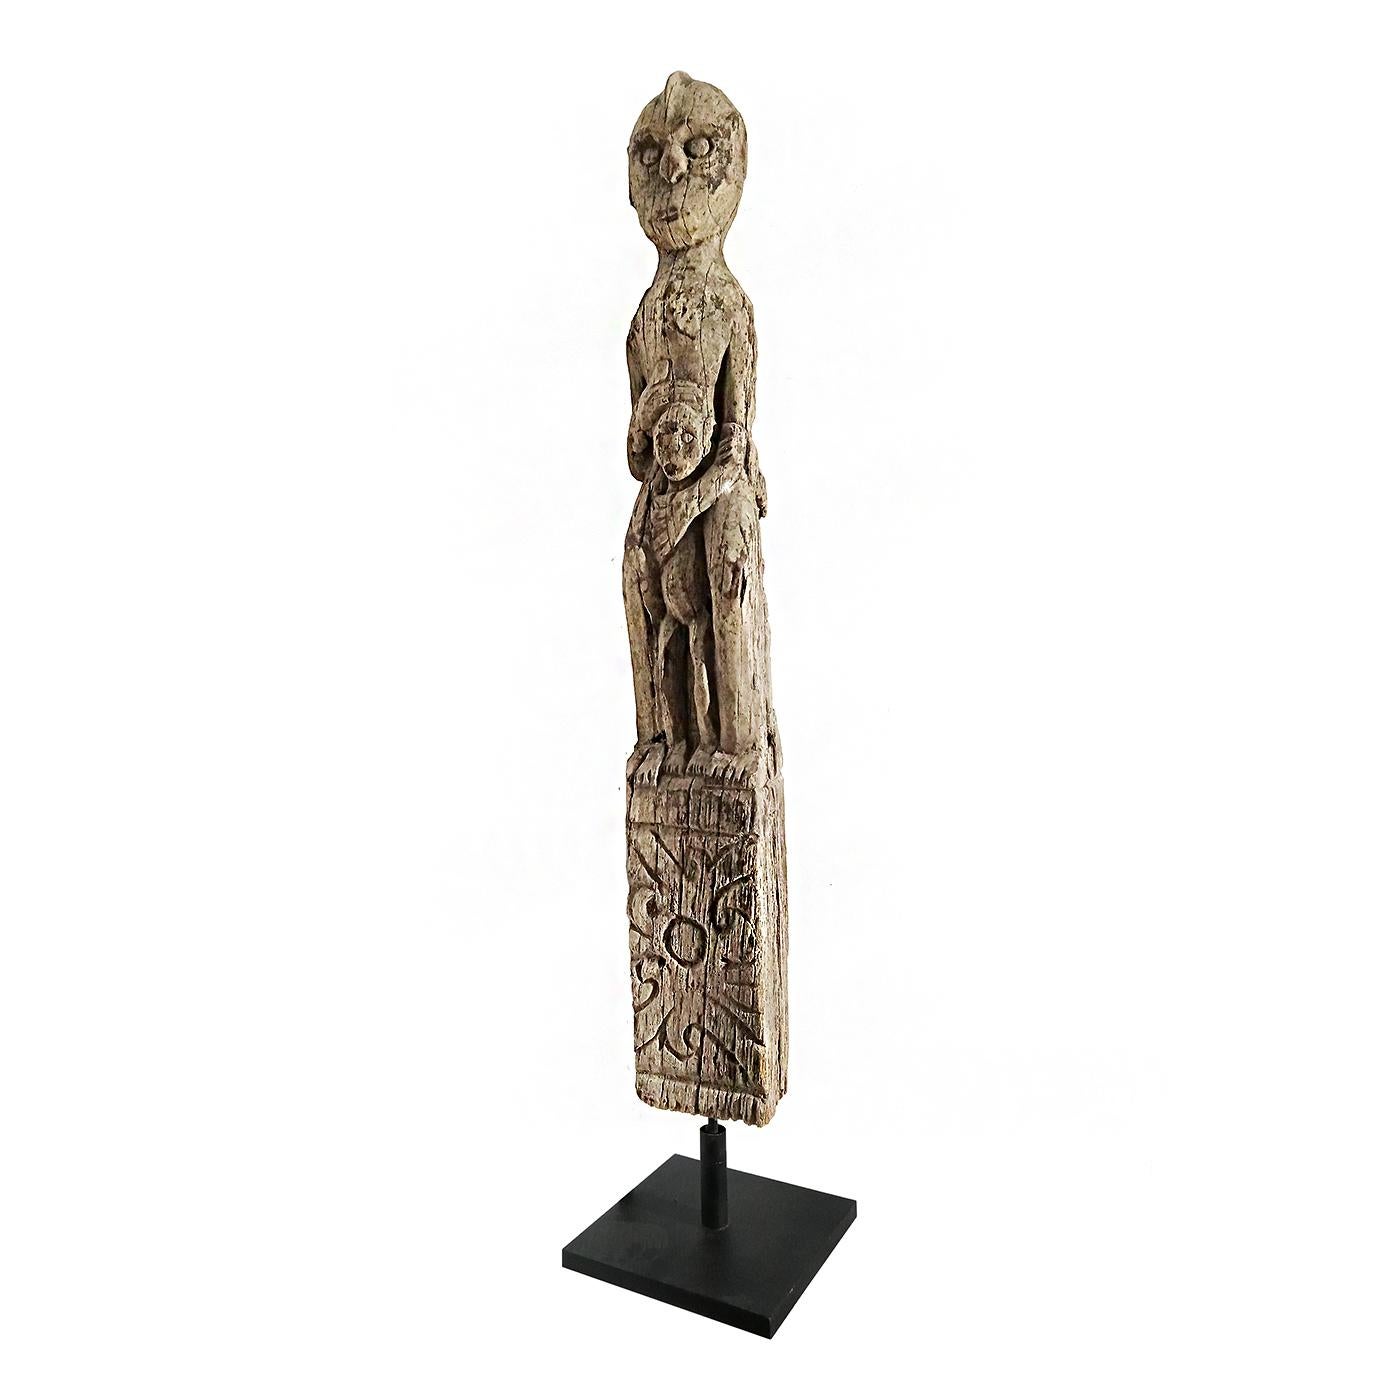 A hand-carved effigy of mother and child from the Dayak tribe in Borneo, mounted on a black metal stand. 

Ancestral figures were important in Dayak culture as a means of spiritual protection. Among the best known are anthropomorphic sculptures